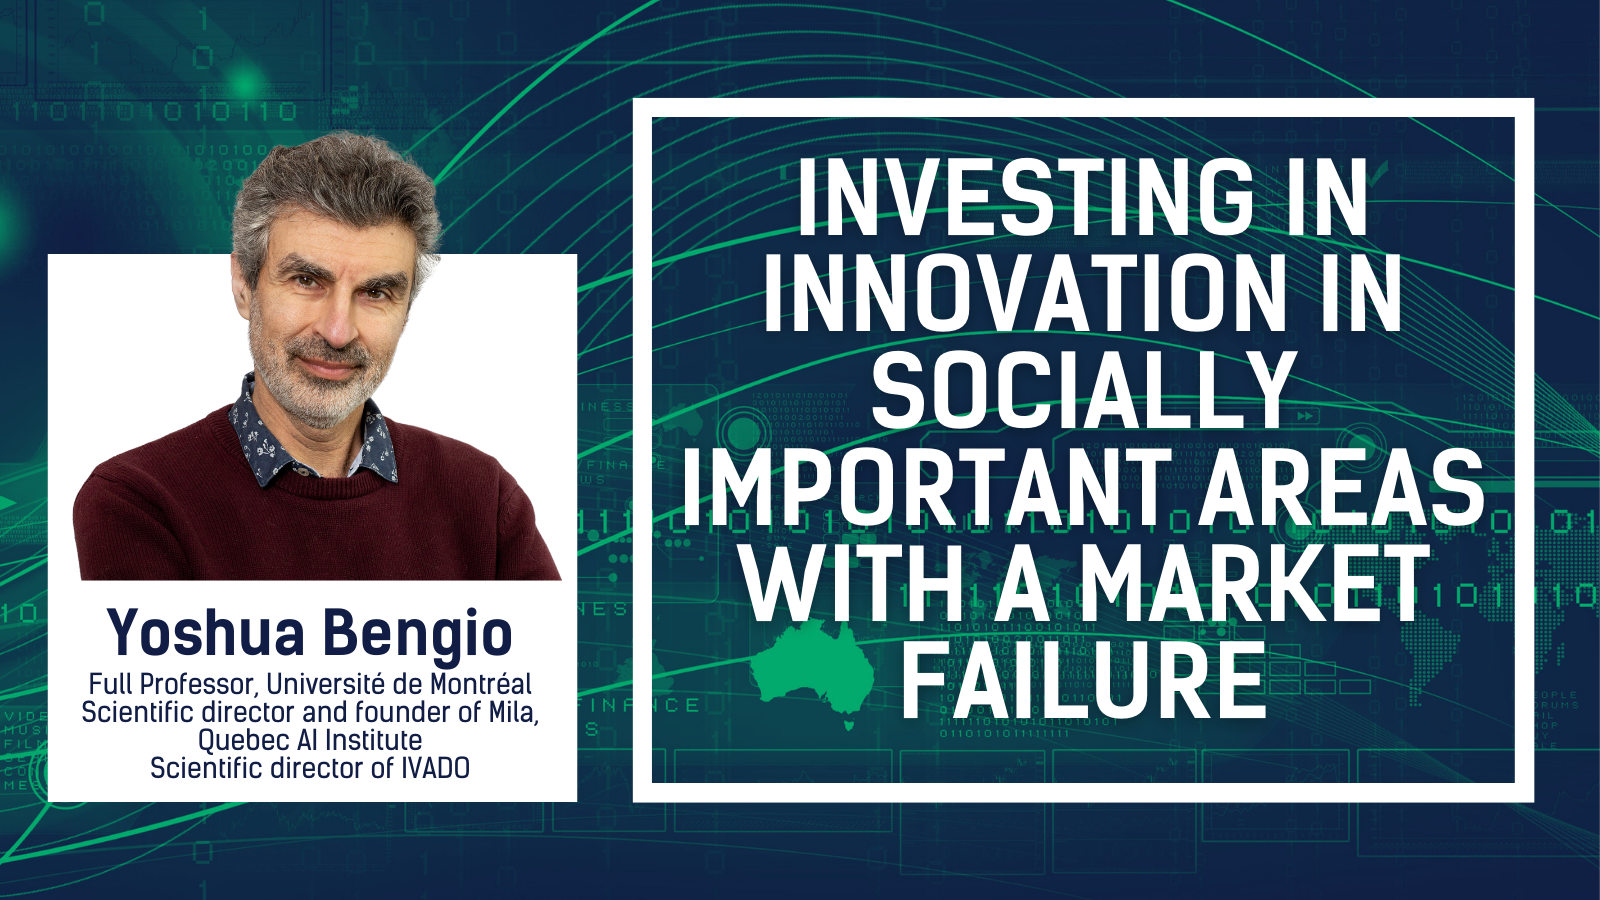 a banner with the title "Investing in innovation in socially important areas with a market failure" with the headshot of an older white man